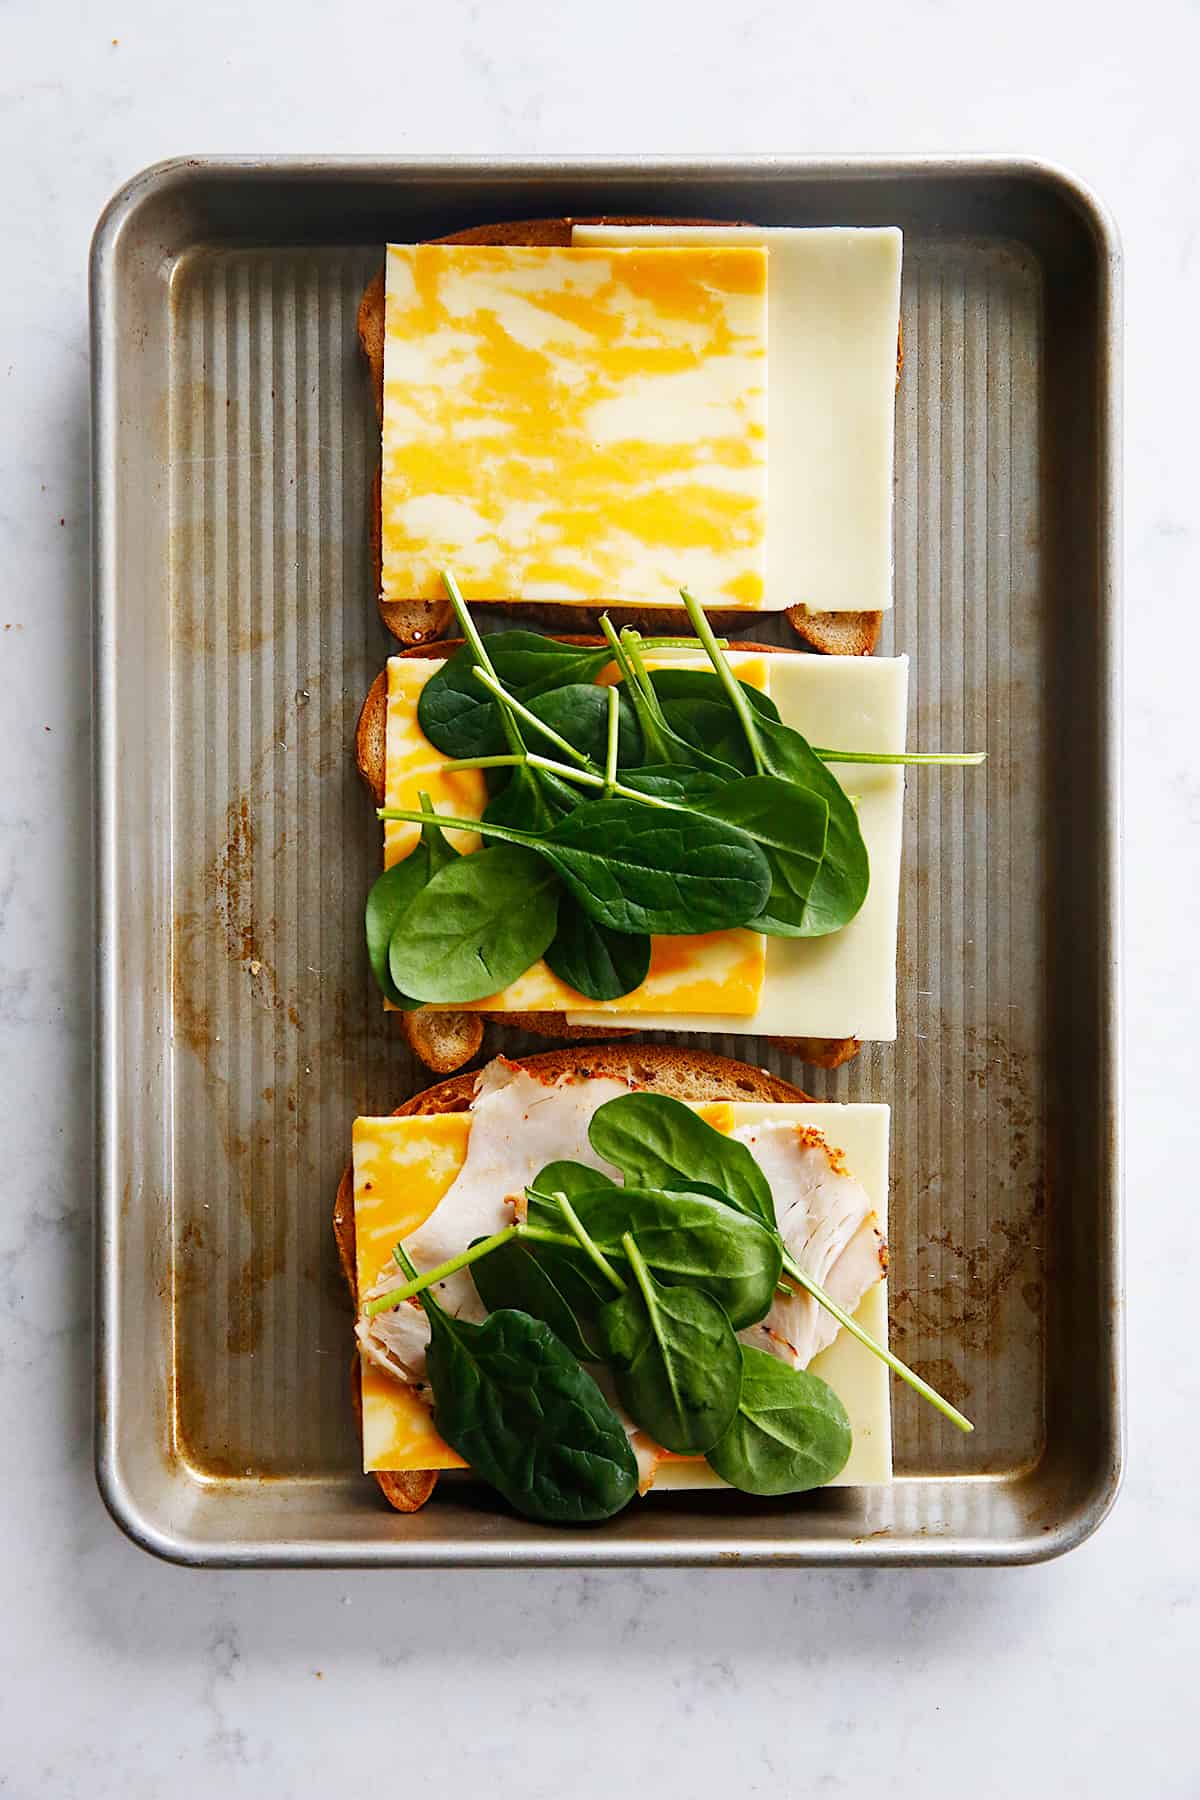 spinach being layered onto a sandwich.